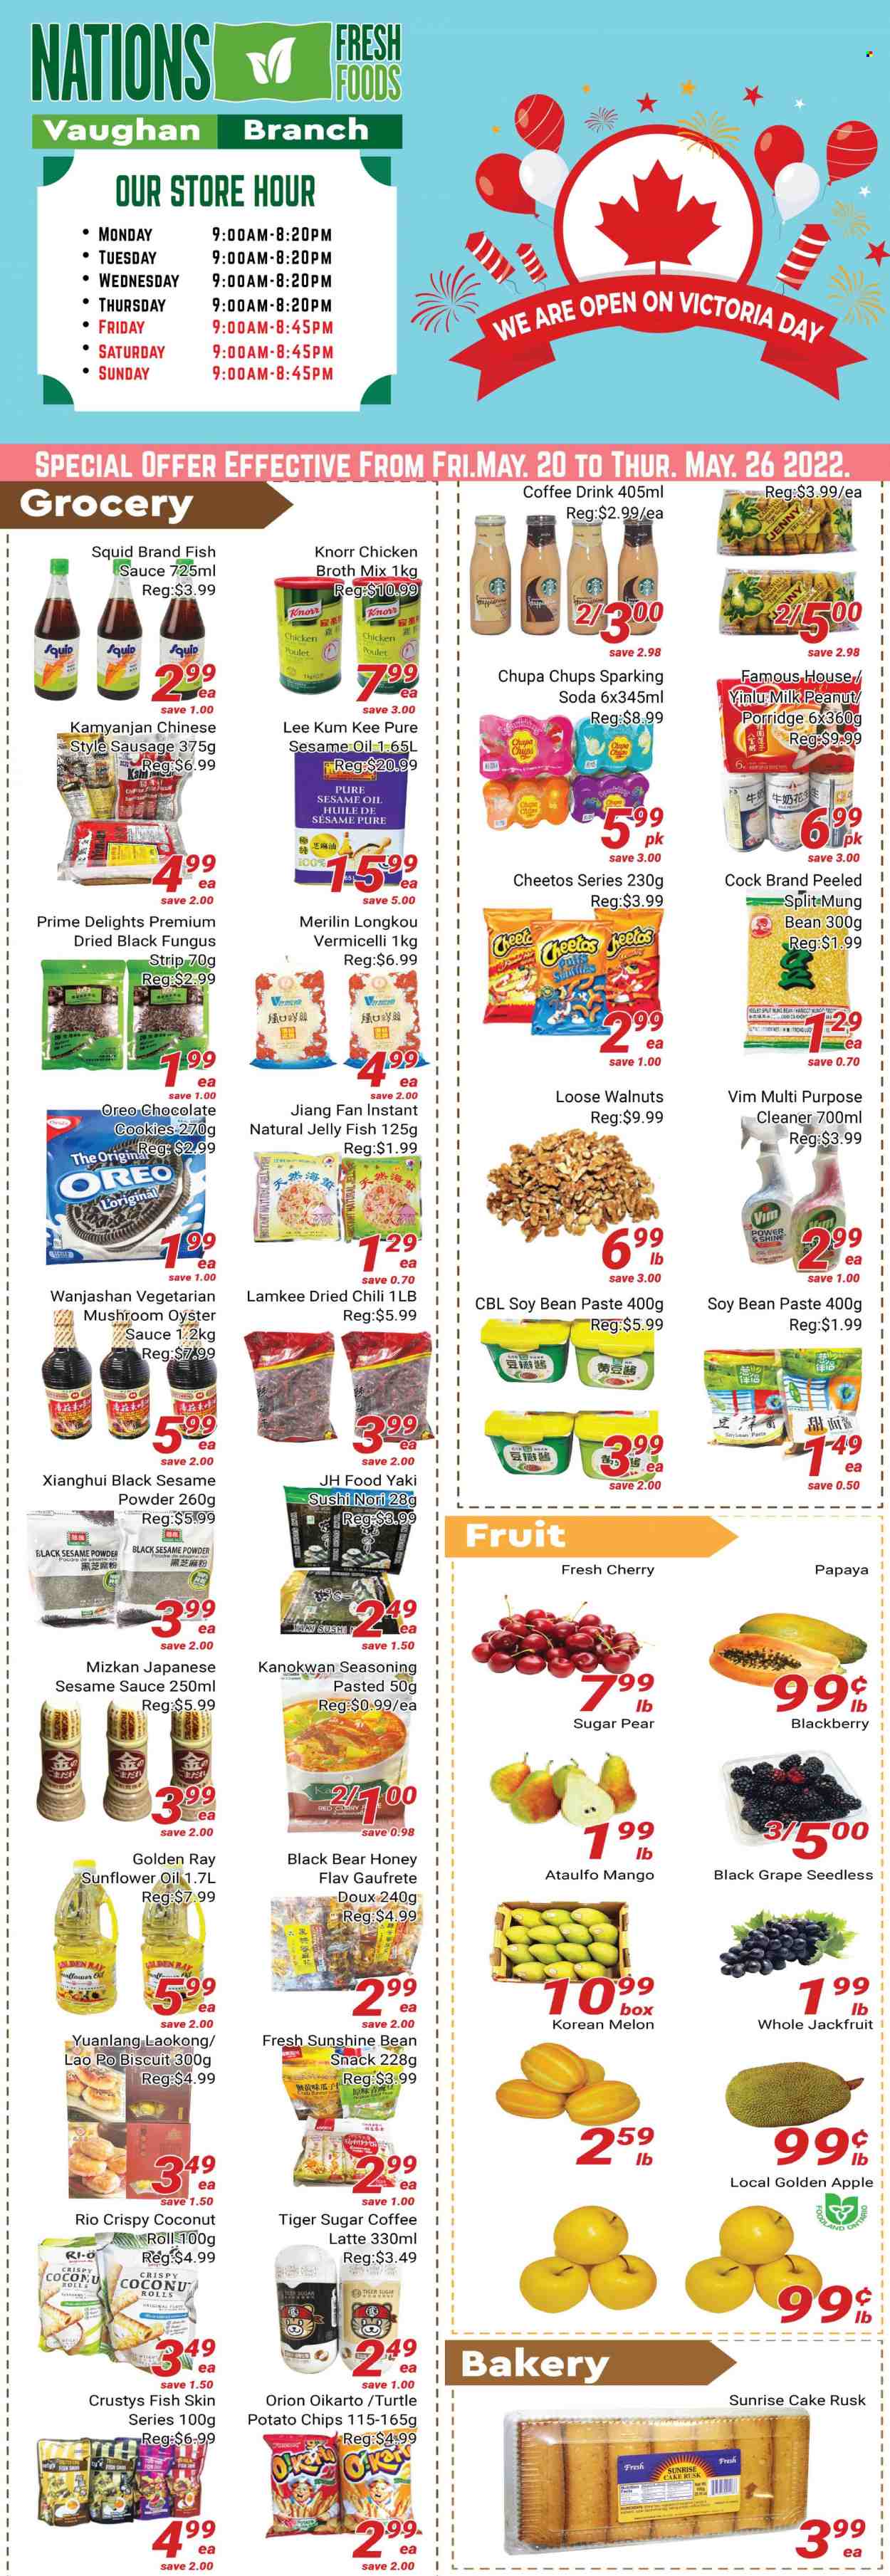 thumbnail - Nations Fresh Foods Flyer - May 20, 2022 - May 26, 2022 - Sales products - rusks, papaya, melons, squid, oysters, sushi, sauce, red curry, sausage, Oreo, jelly, milk, coffee drink, Sunshine, cookies, chocolate, chocolate cookies, lollipop, biscuit, Chupa Chups, potato chips, Cheetos, salty snack, sugar, chicken broth, broth, soy bean paste, porridge, spice, fish sauce, Lee Kum Kee, sesame oil, sunflower oil, honey, walnuts, soda, all purpose cleaner, pears, Knorr. Page 1.